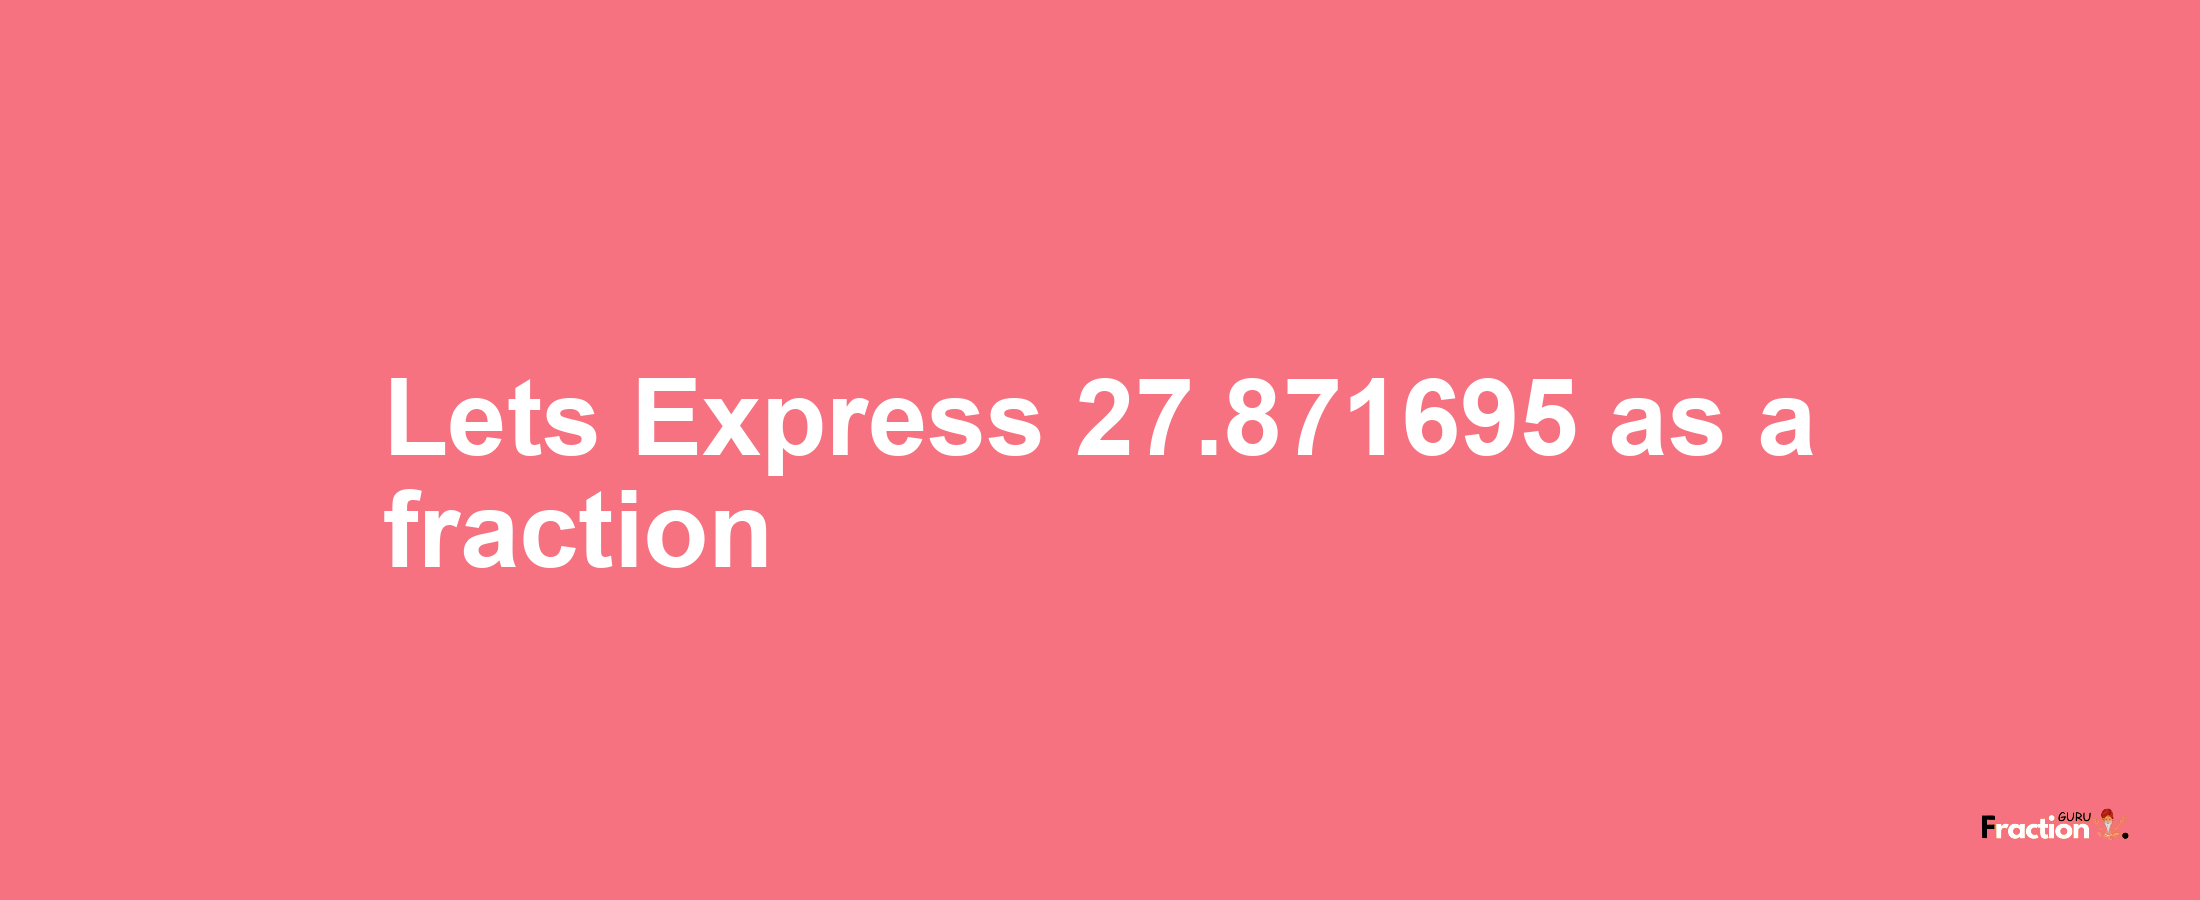 Lets Express 27.871695 as afraction